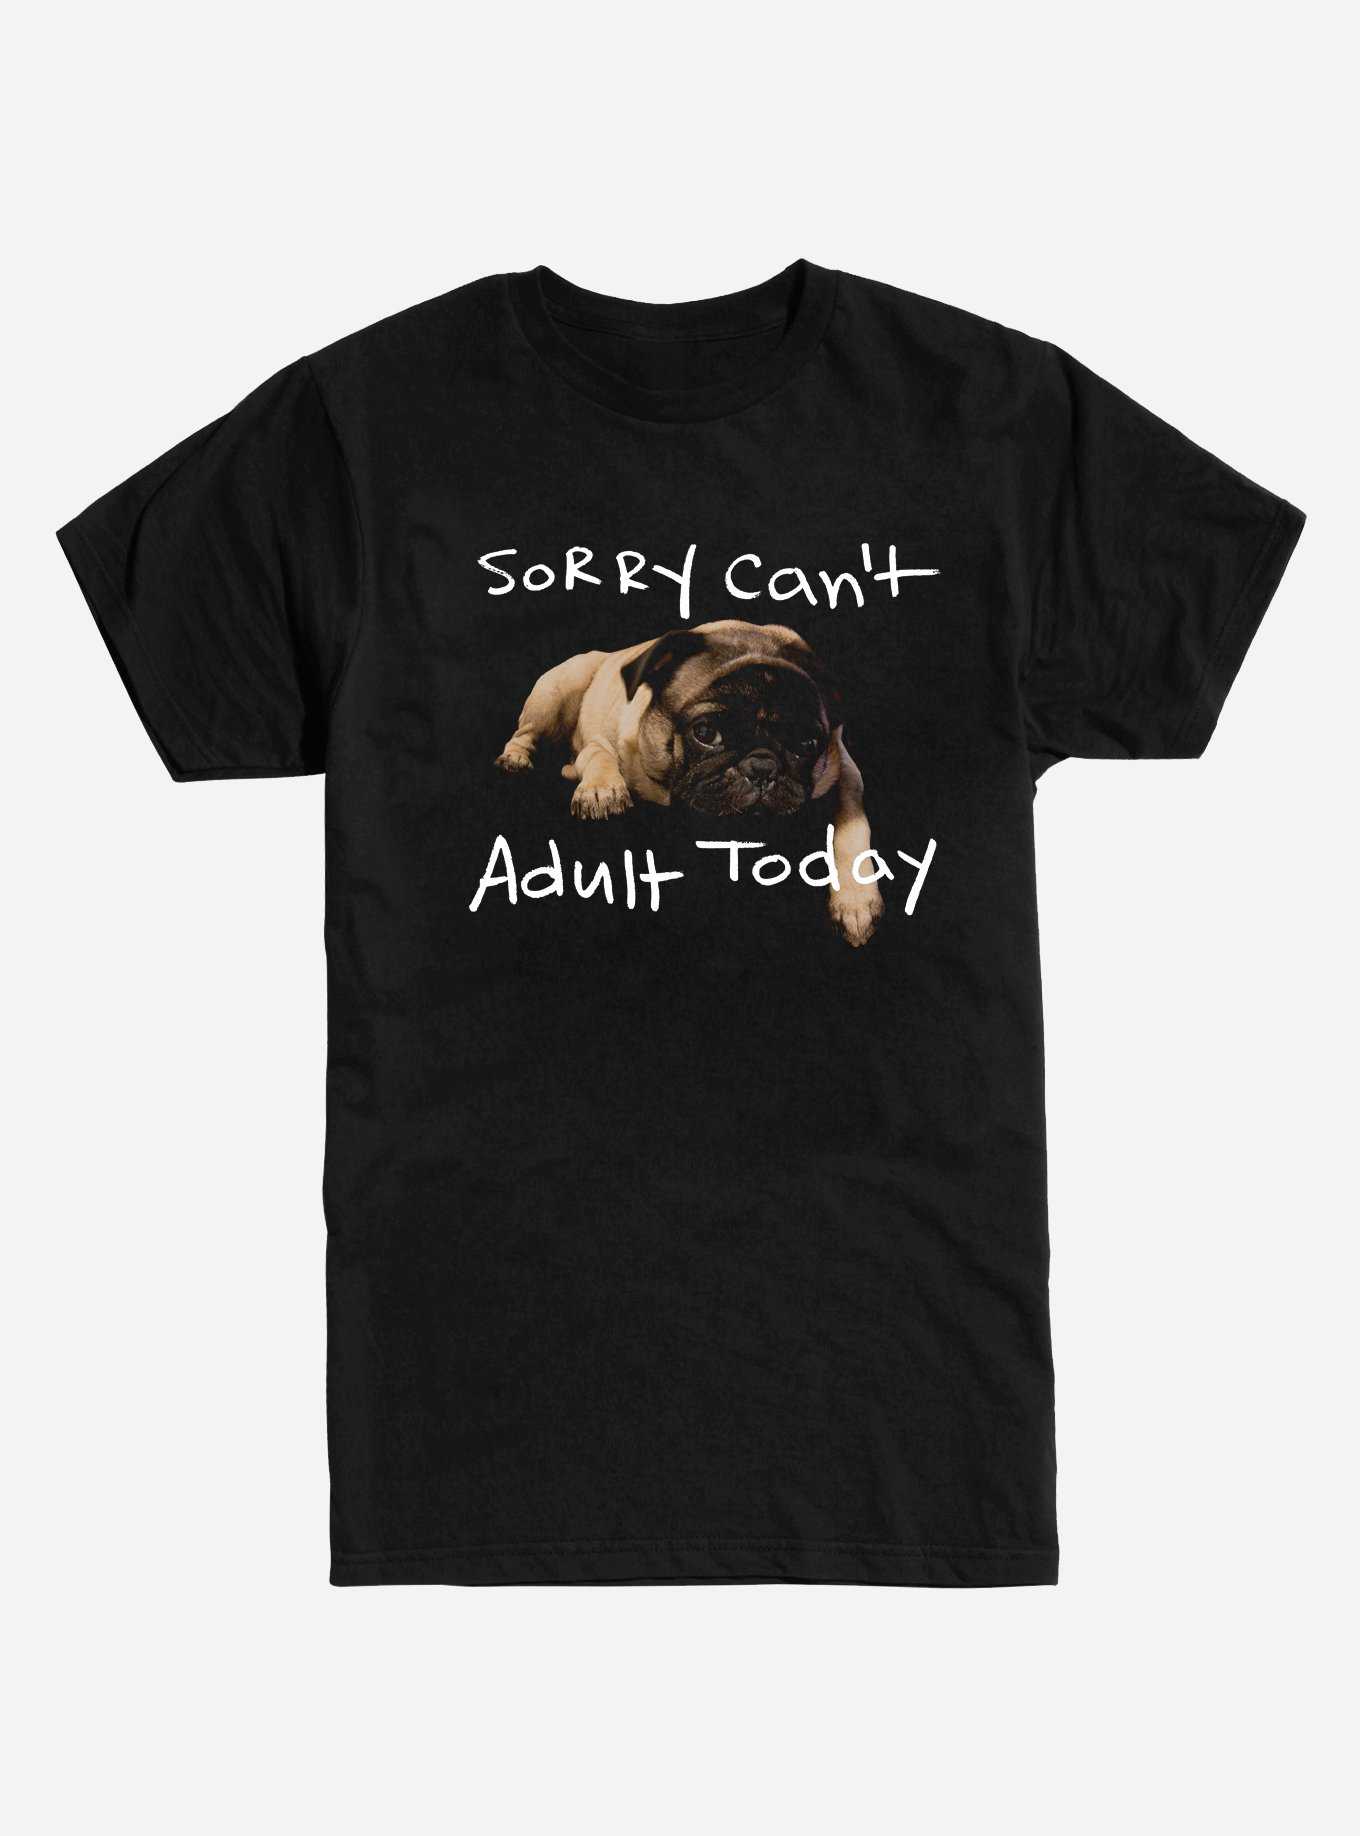 Sorry Can't Adult Today Pug T-Shirt, , hi-res